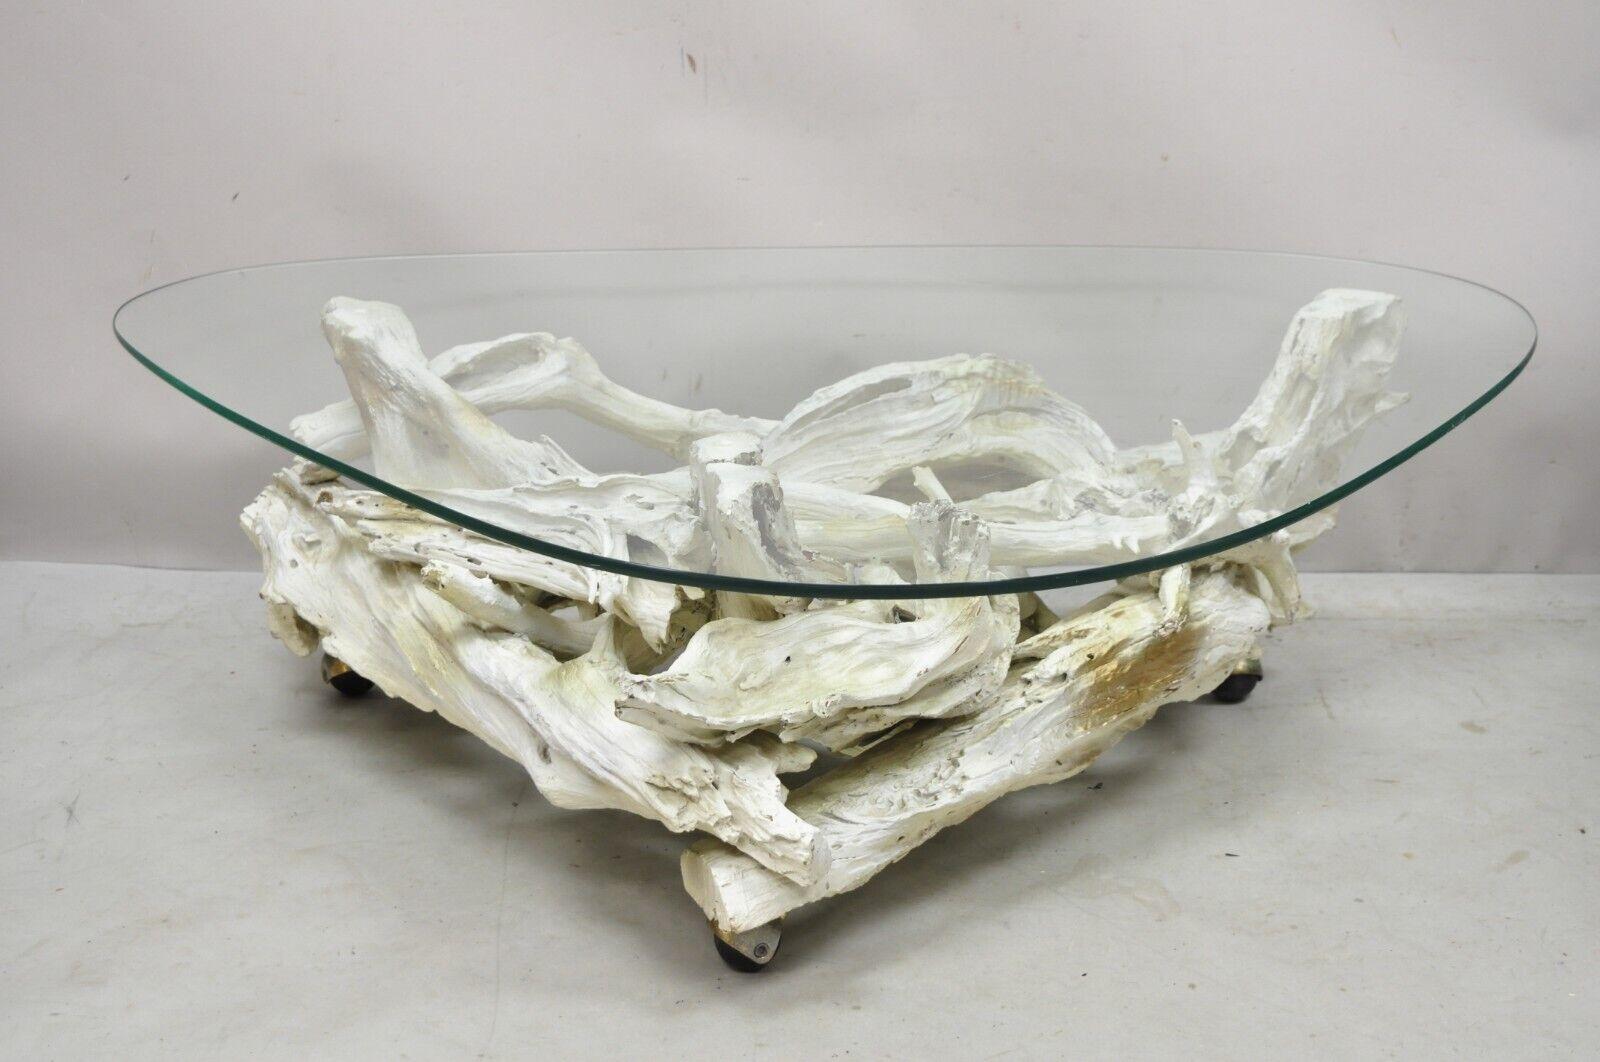 Vintage Mid-Century Modern white driftwood base glass top coffee table. Item features a sculptural driftwood base, shaped glass top, rolling casters, white and gold distress painted finish. Circa mid-20th century. Measurements: 14.75